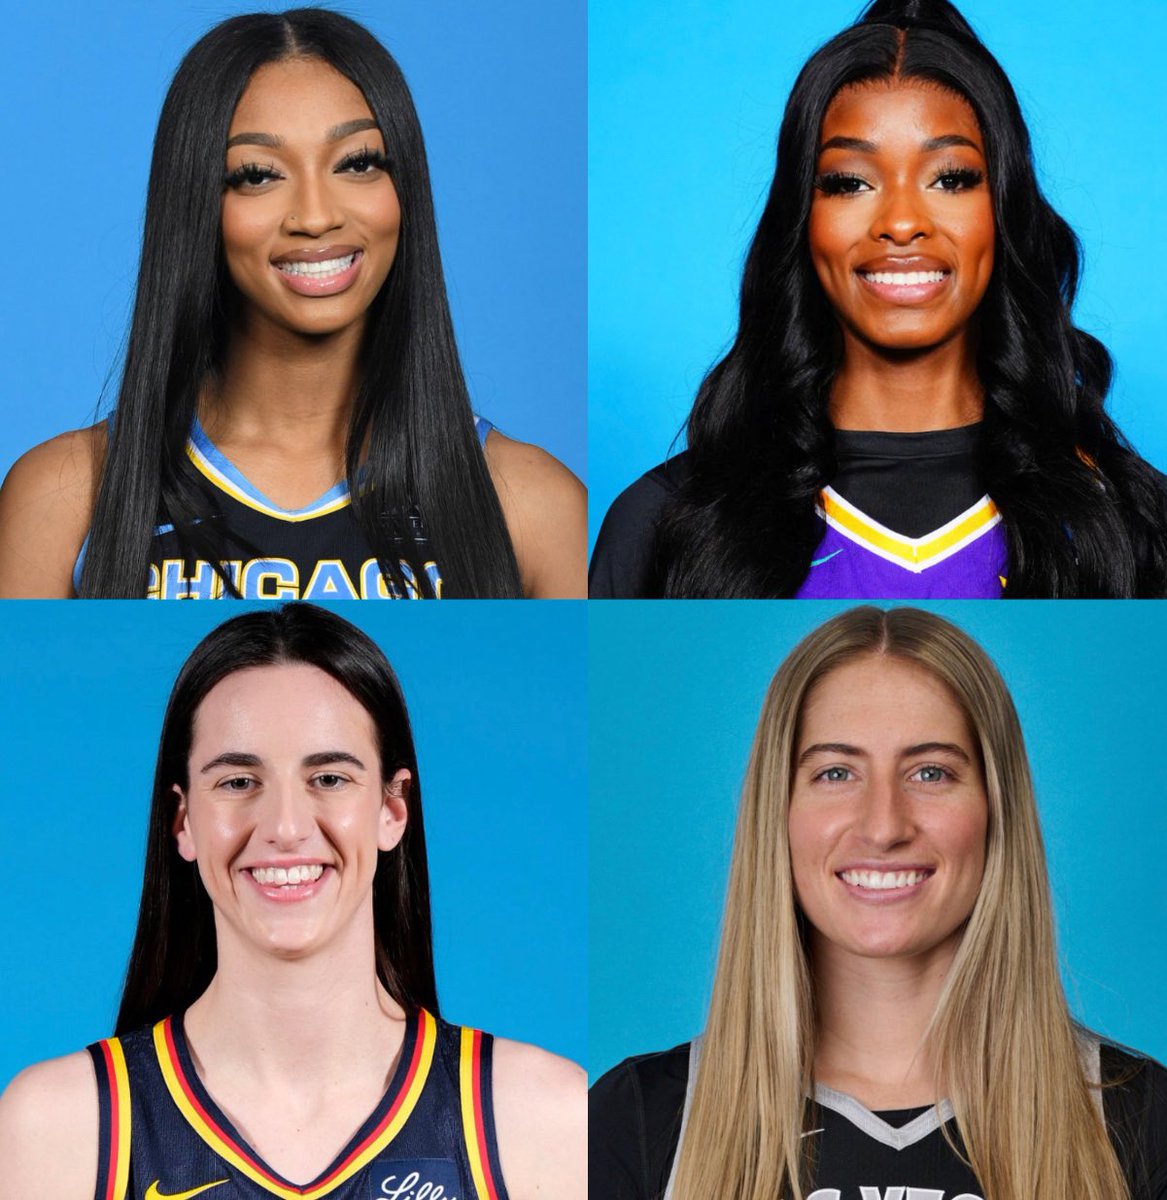 Here’s our fan-voted ‘top Rookies of Week 2’, Ranked: 1. Angel Reese (Chicago): 2,239 votes 13.0 PTS | 7.9 RBS | 1.5 AST | 1.0 STL | 36.8% FG 2. Rickea Jackson (Los Angeles): 1,003 votes 9.7 PTS | 2.5 RBS | 58.8% FG in 25.3 MIN 3. Kate Martin (Las Vegas): 873 votes 6.0 PTS |